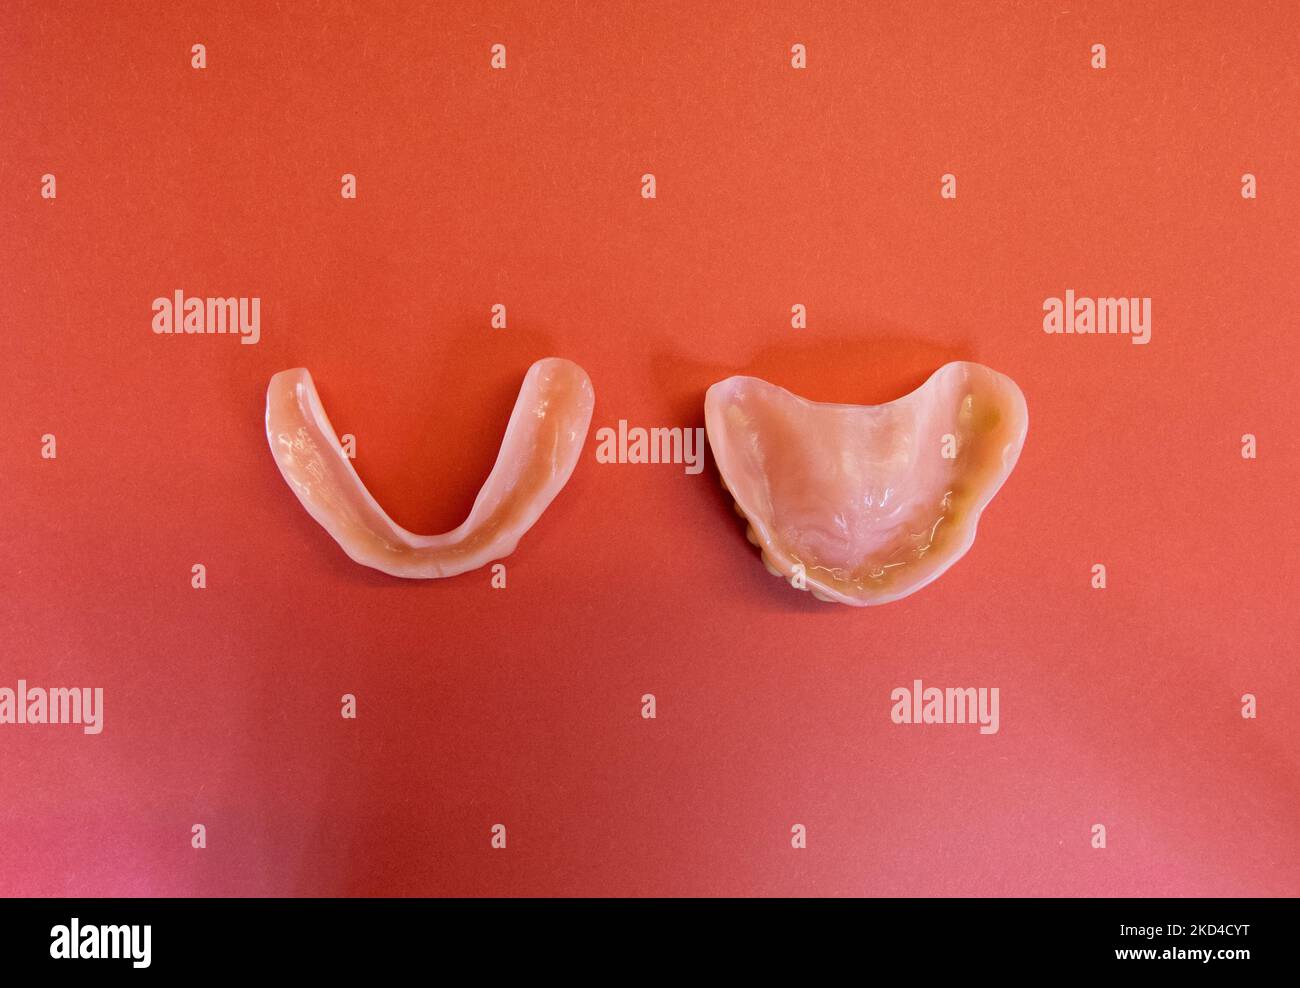 a pair of Dentures (top and bottom) - removable false teeth made of acrylic isolated on a red background - both sets facing down Stock Photo